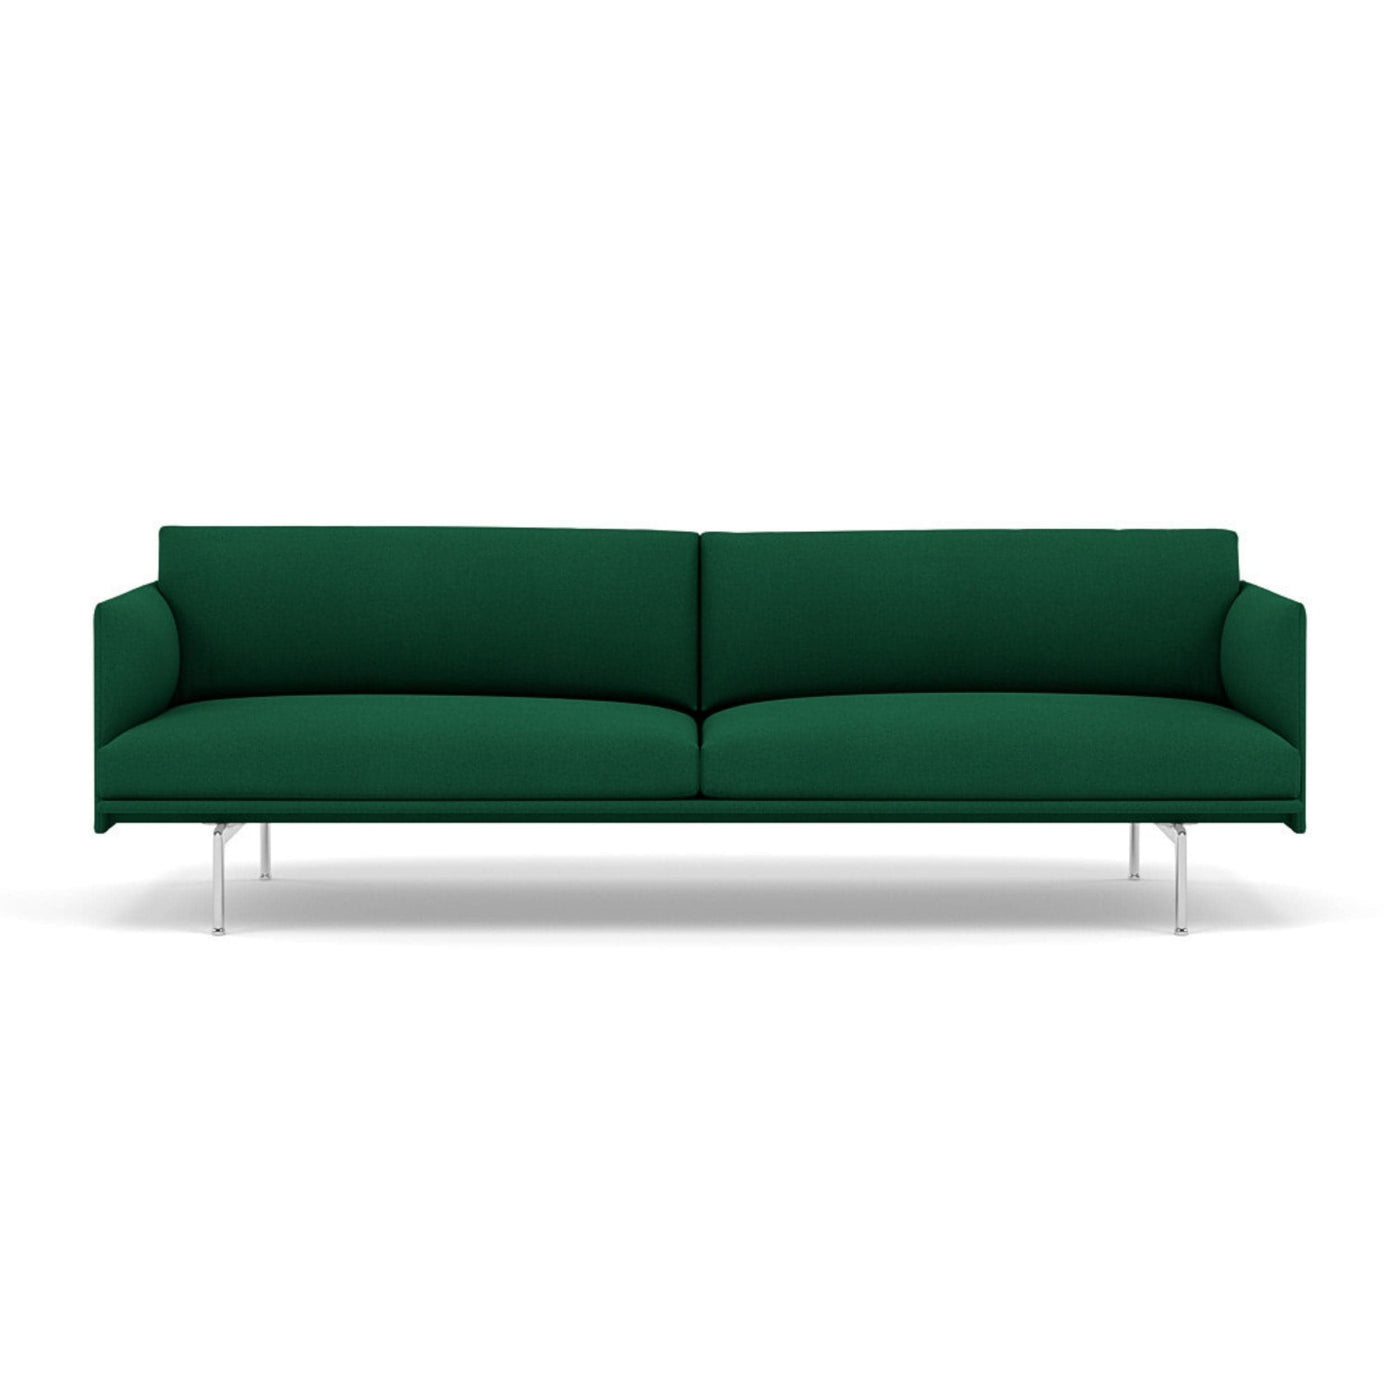 Muuto Outline Studio Sofa 220 in hallingdal 944 and polished aluminium legs. Made to order from someday designs. #colour_hallingdal-944-green